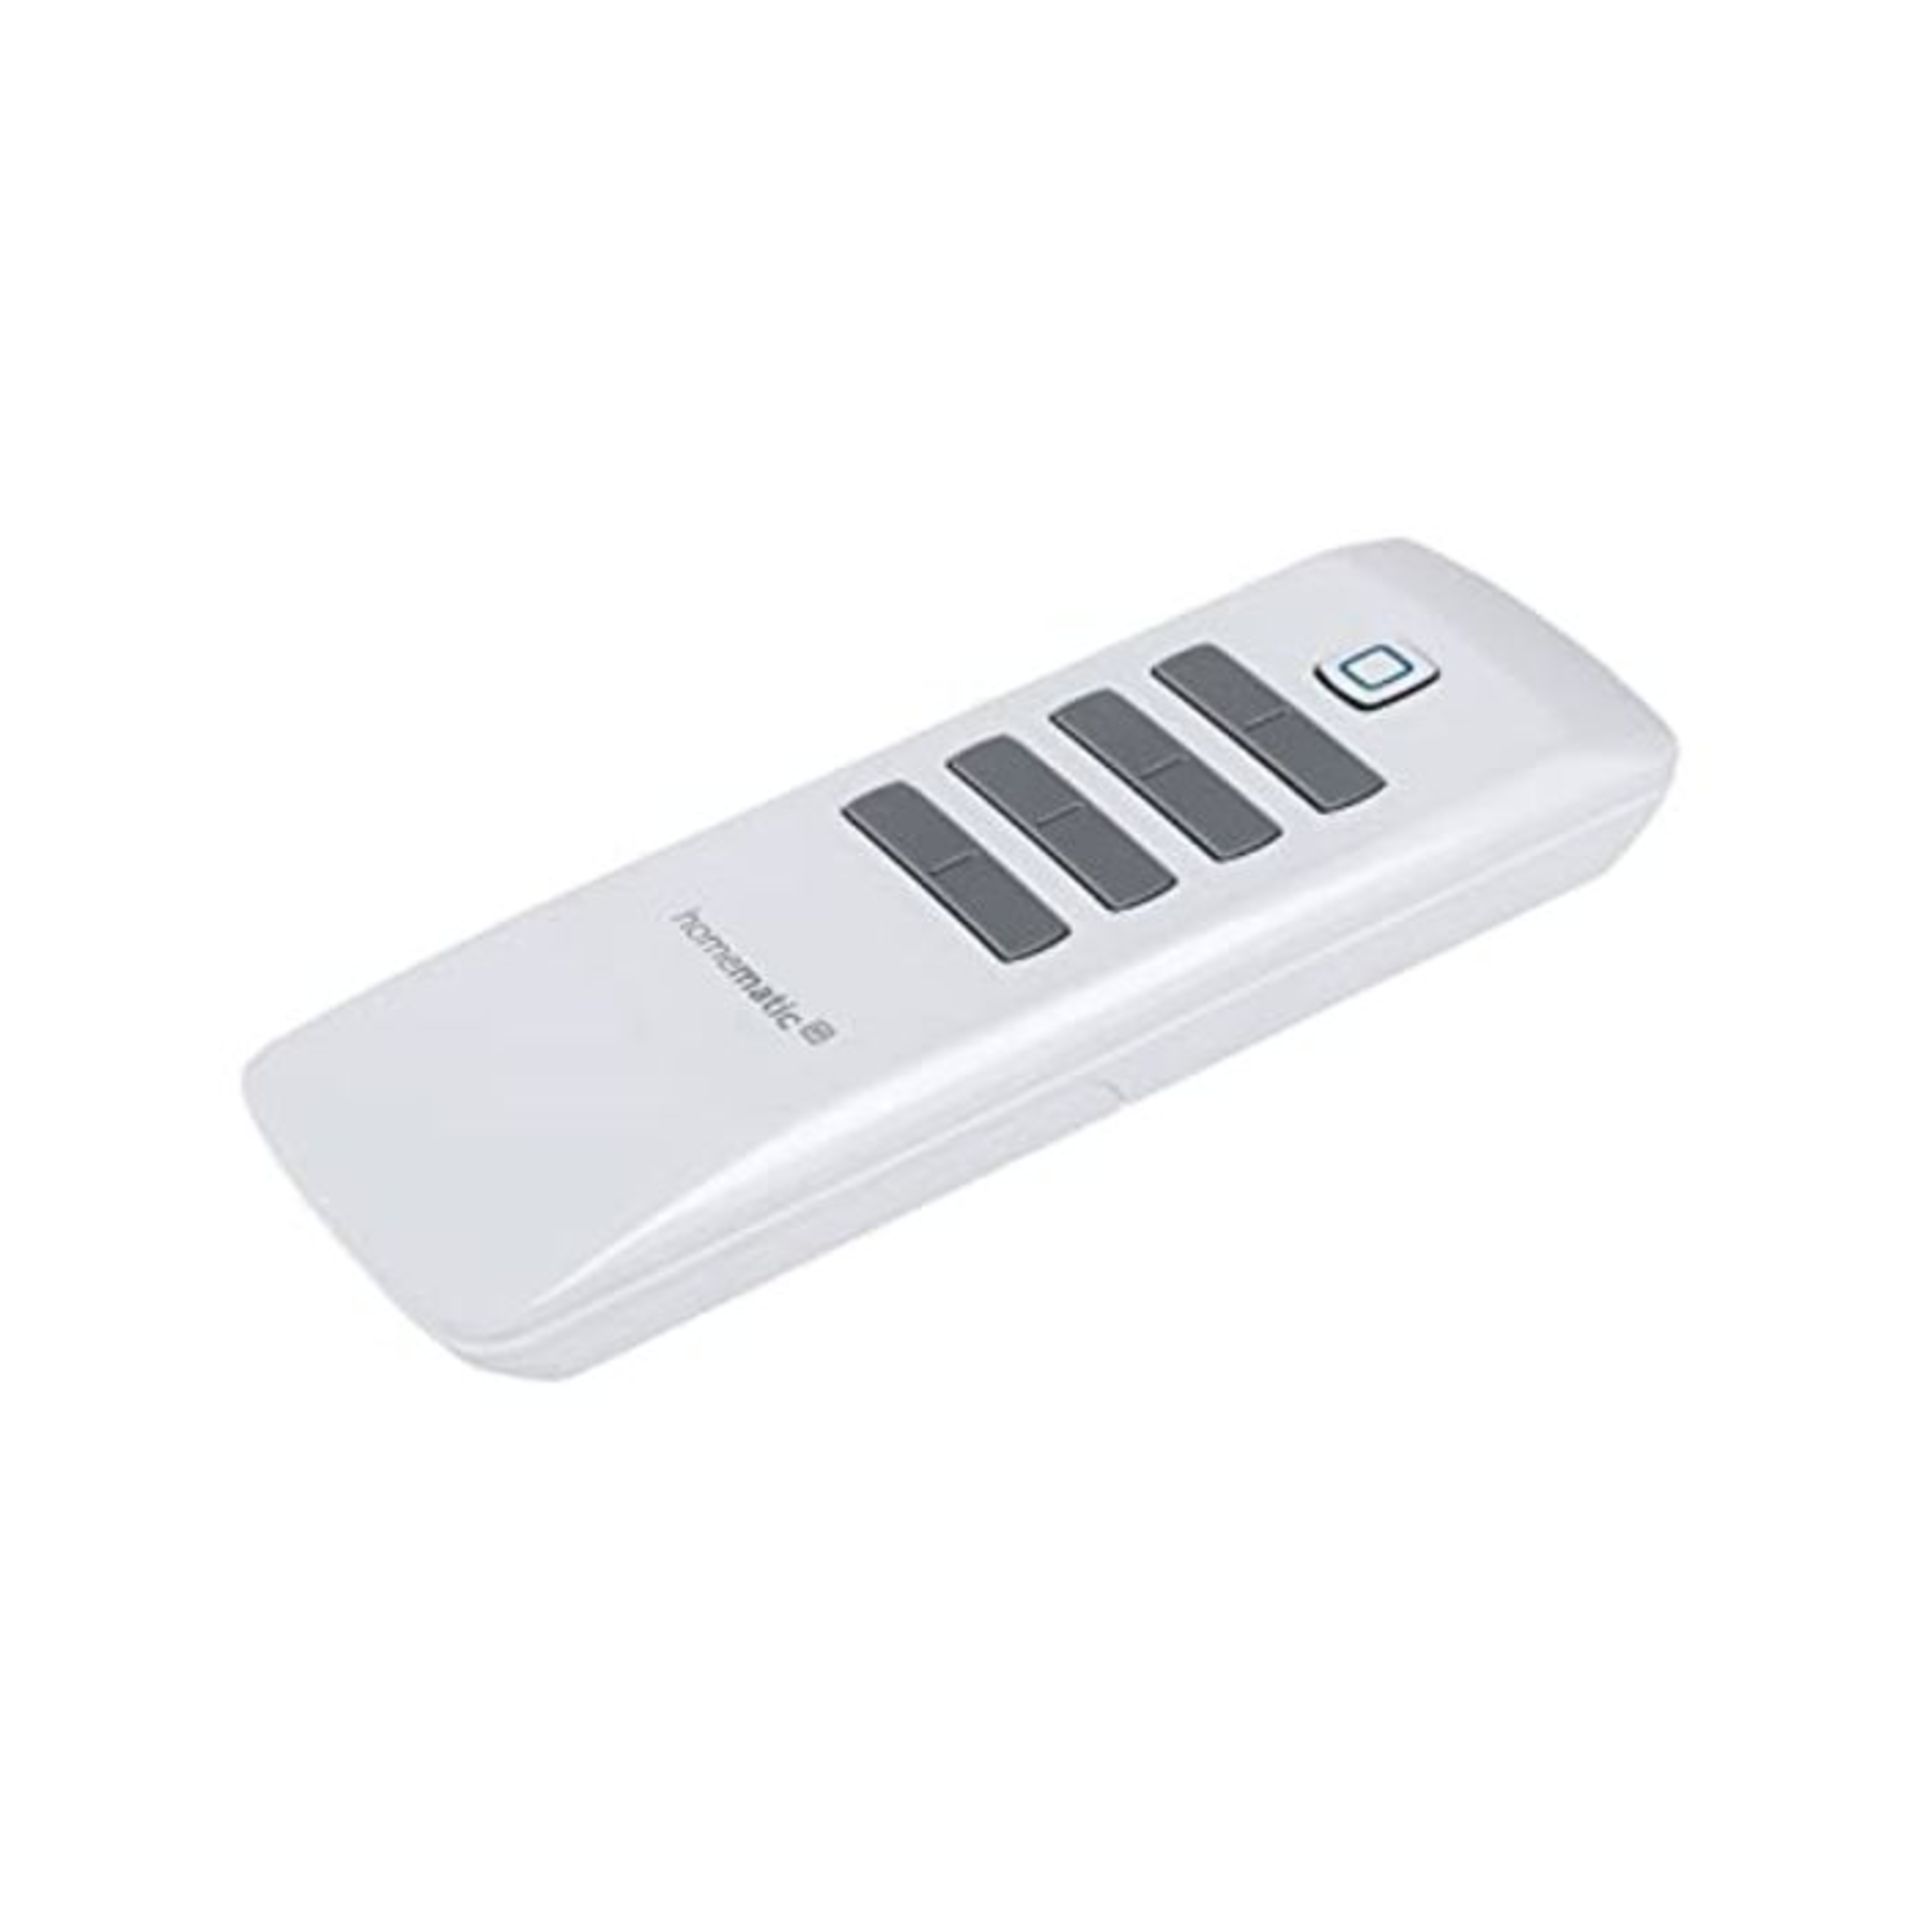 Homematic IP 142307A0 8 Buttons Remote Control - White